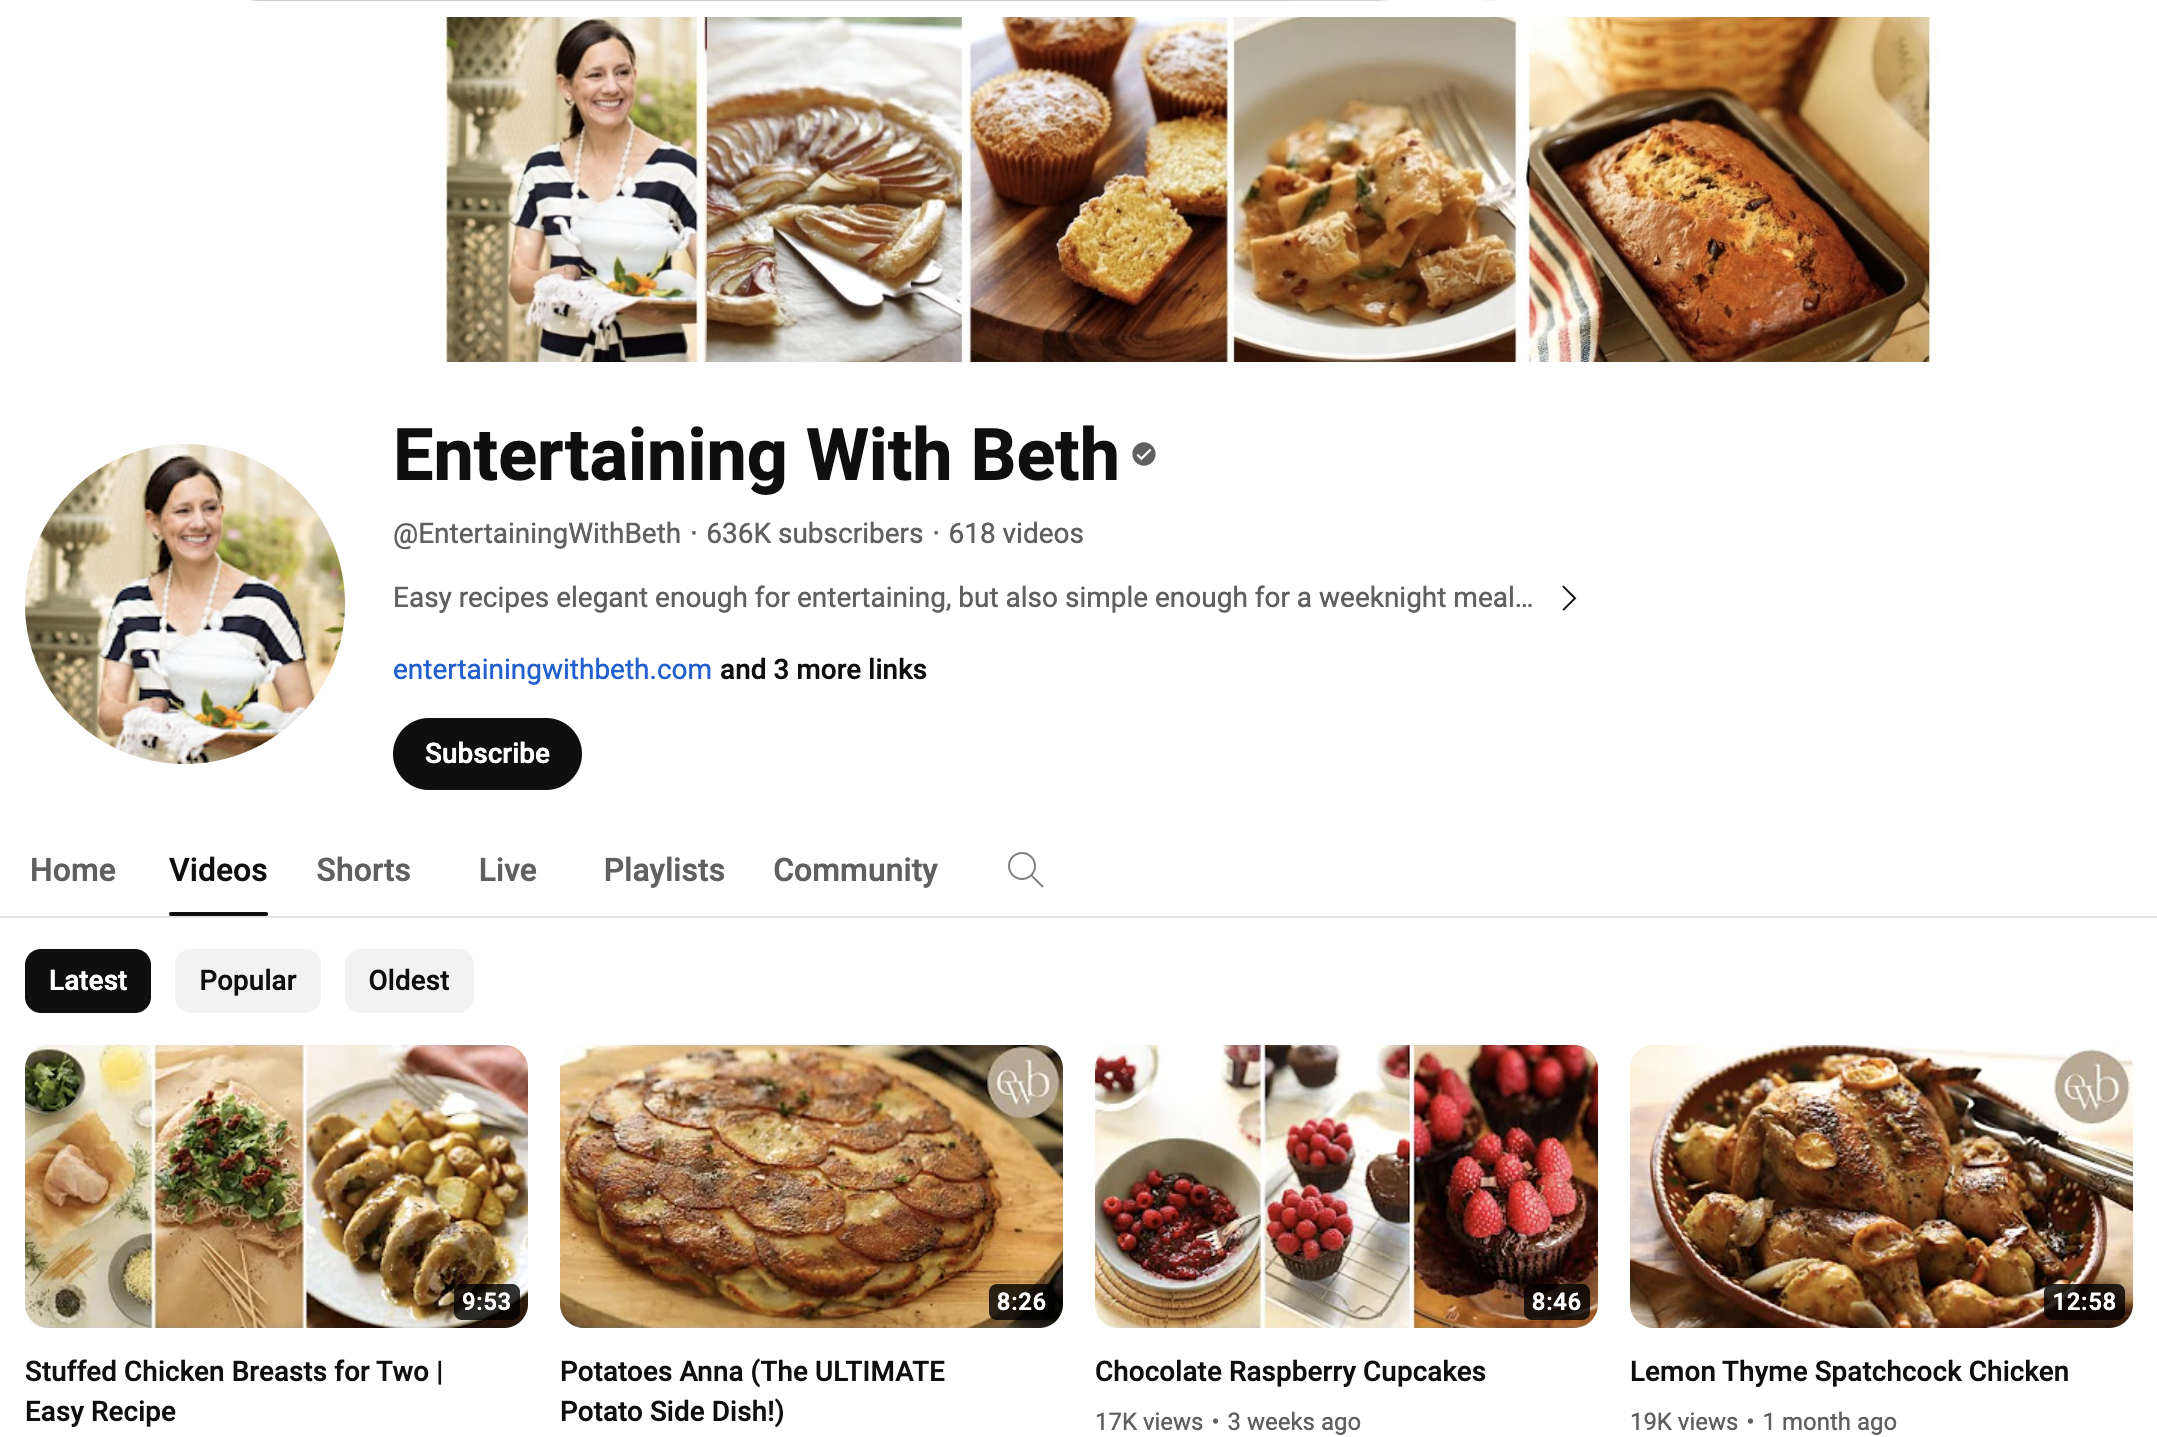 Screenshot of video page for YouTube cooking channel Entertaining Witj Beth